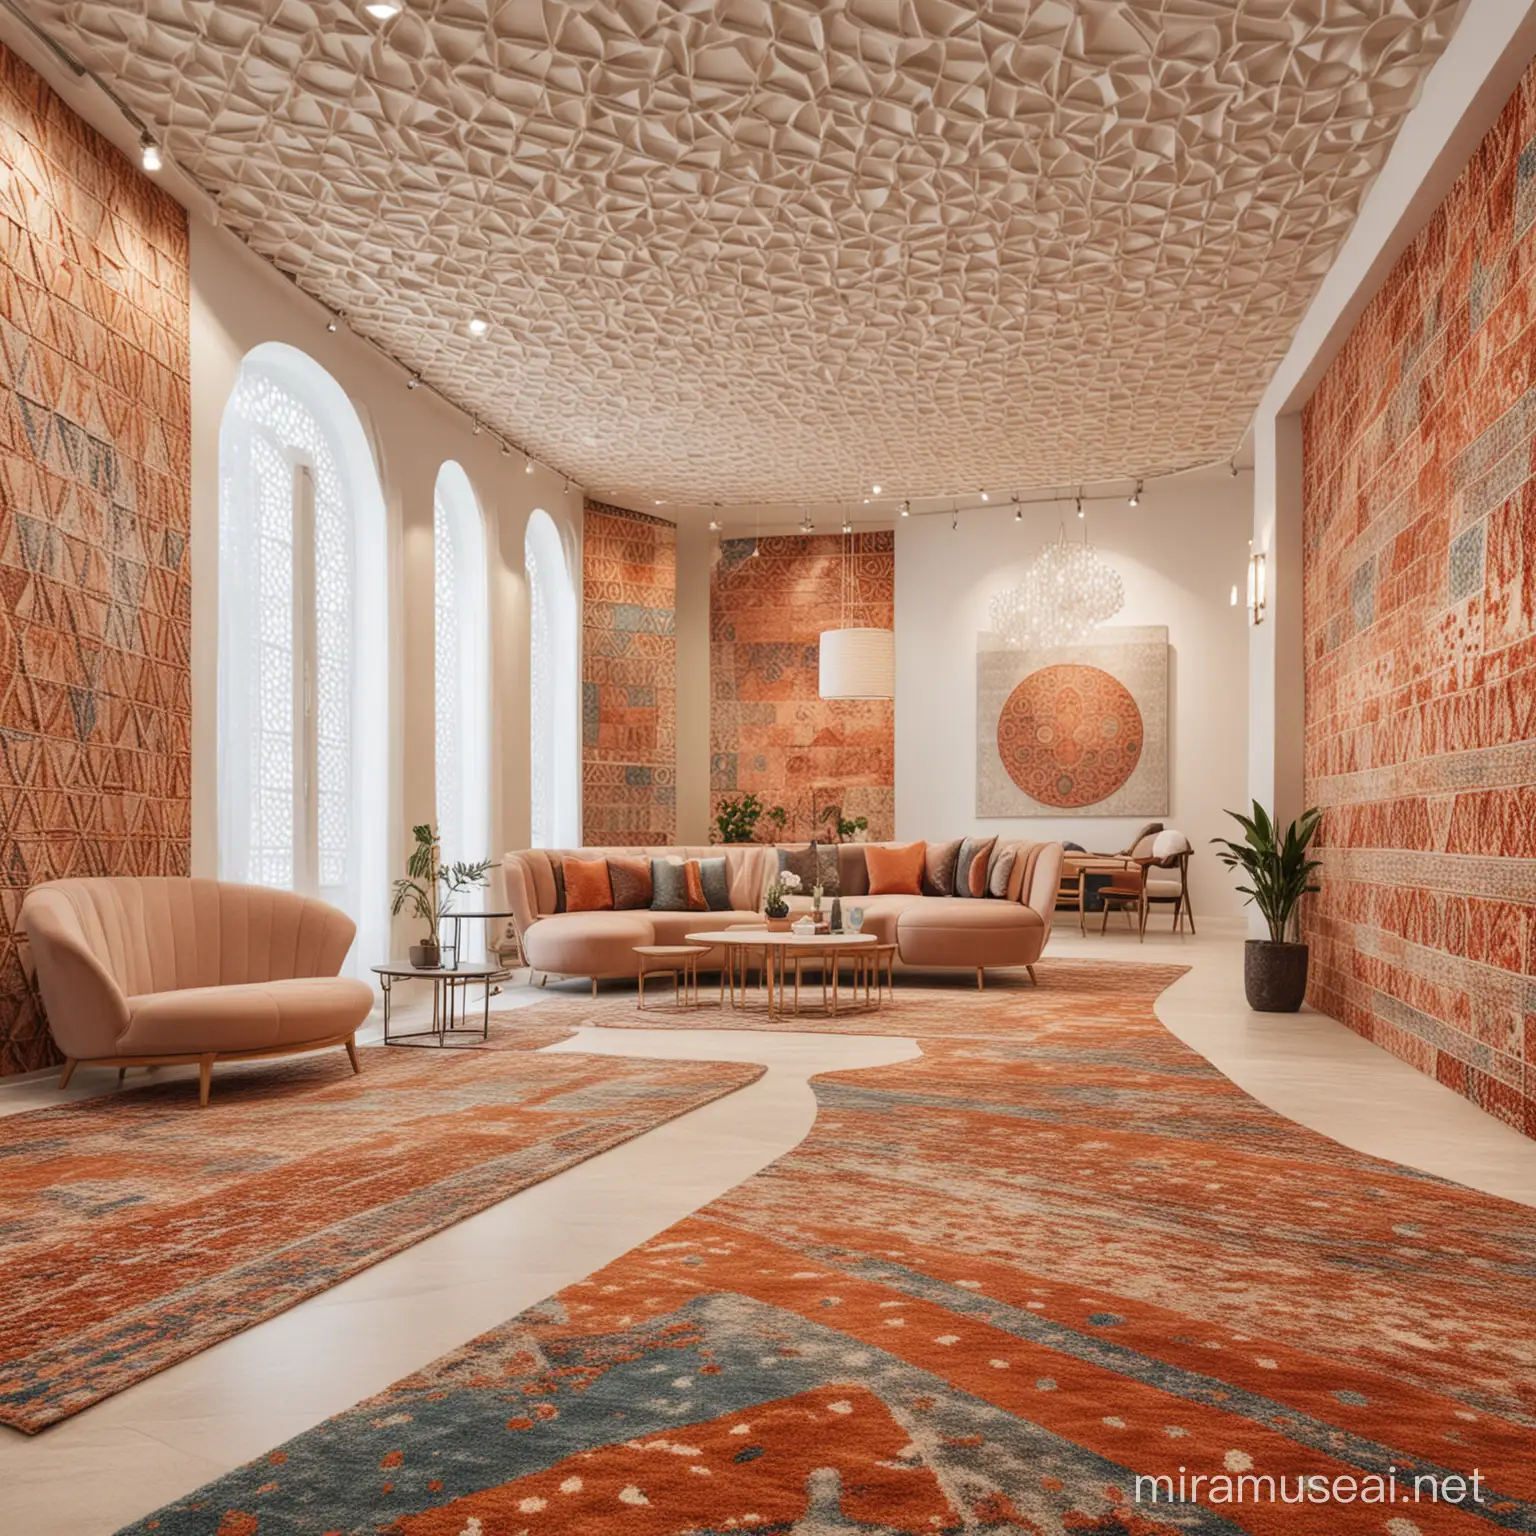 A stunning parametric interior design of a rug showroom inspired by Jaipur's unique patterns and textures are a perfect representation of our diverse and creative approach to design.